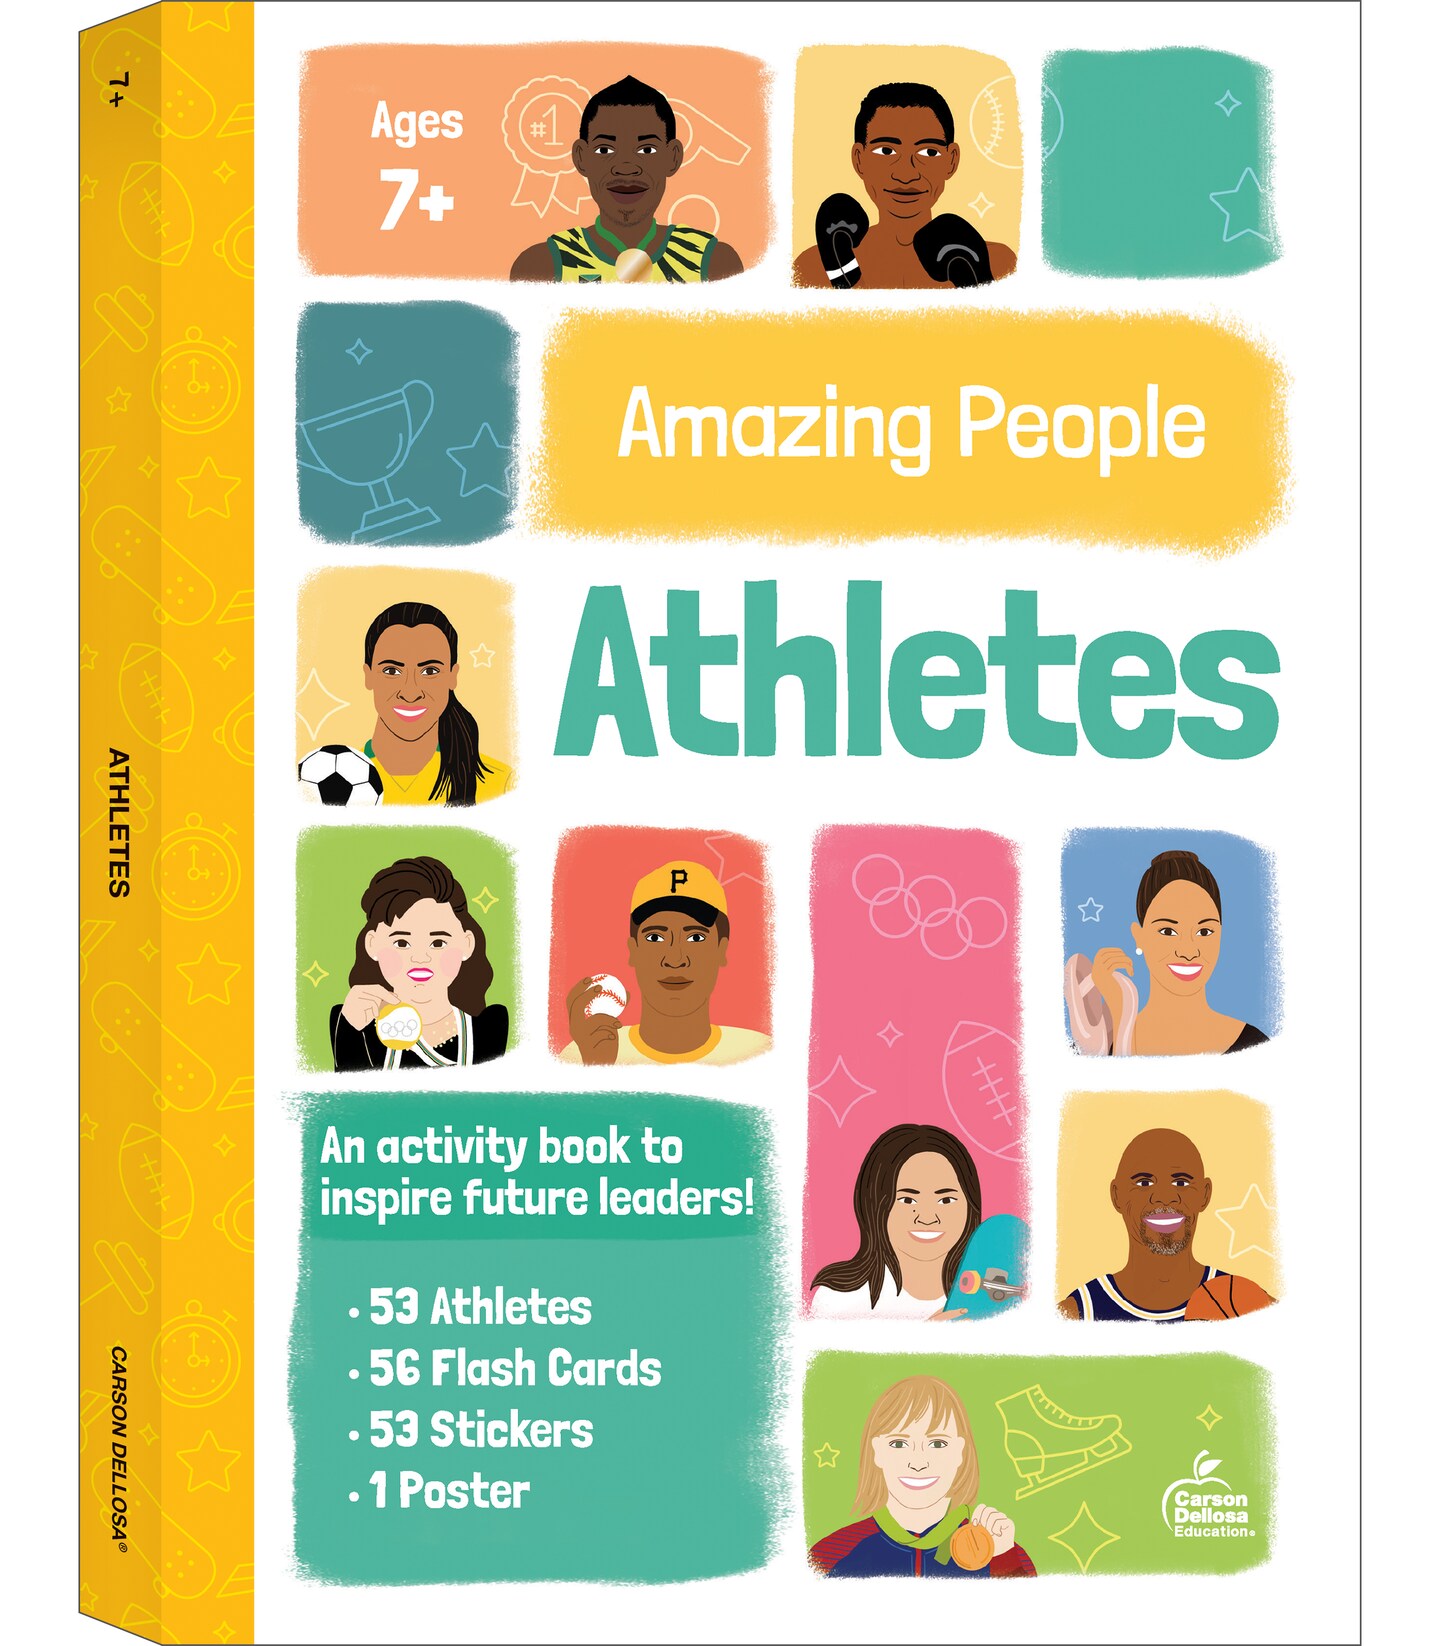 Amazing People: Athletes Activity Book for Children, Inspiring Athletes Children&#x27;s Workbook With Flash Cards, Puzzles, Games, Motivational Poster, and Stickers, Activity Books for Grade 1 +